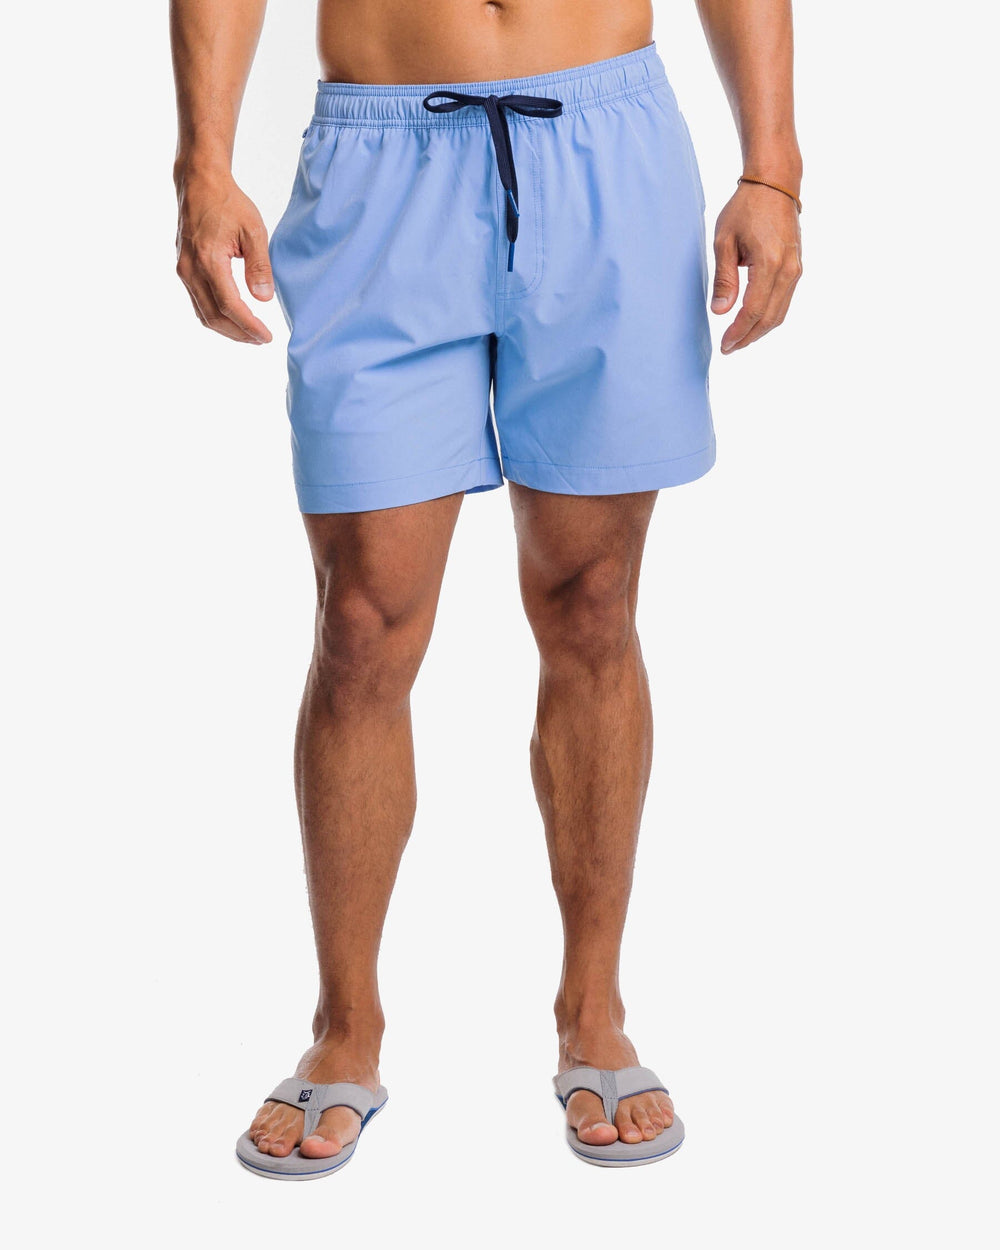 The front view of the Southern Tide Solid Swim Trunk 3 by Southern Tide - Ocean Channel